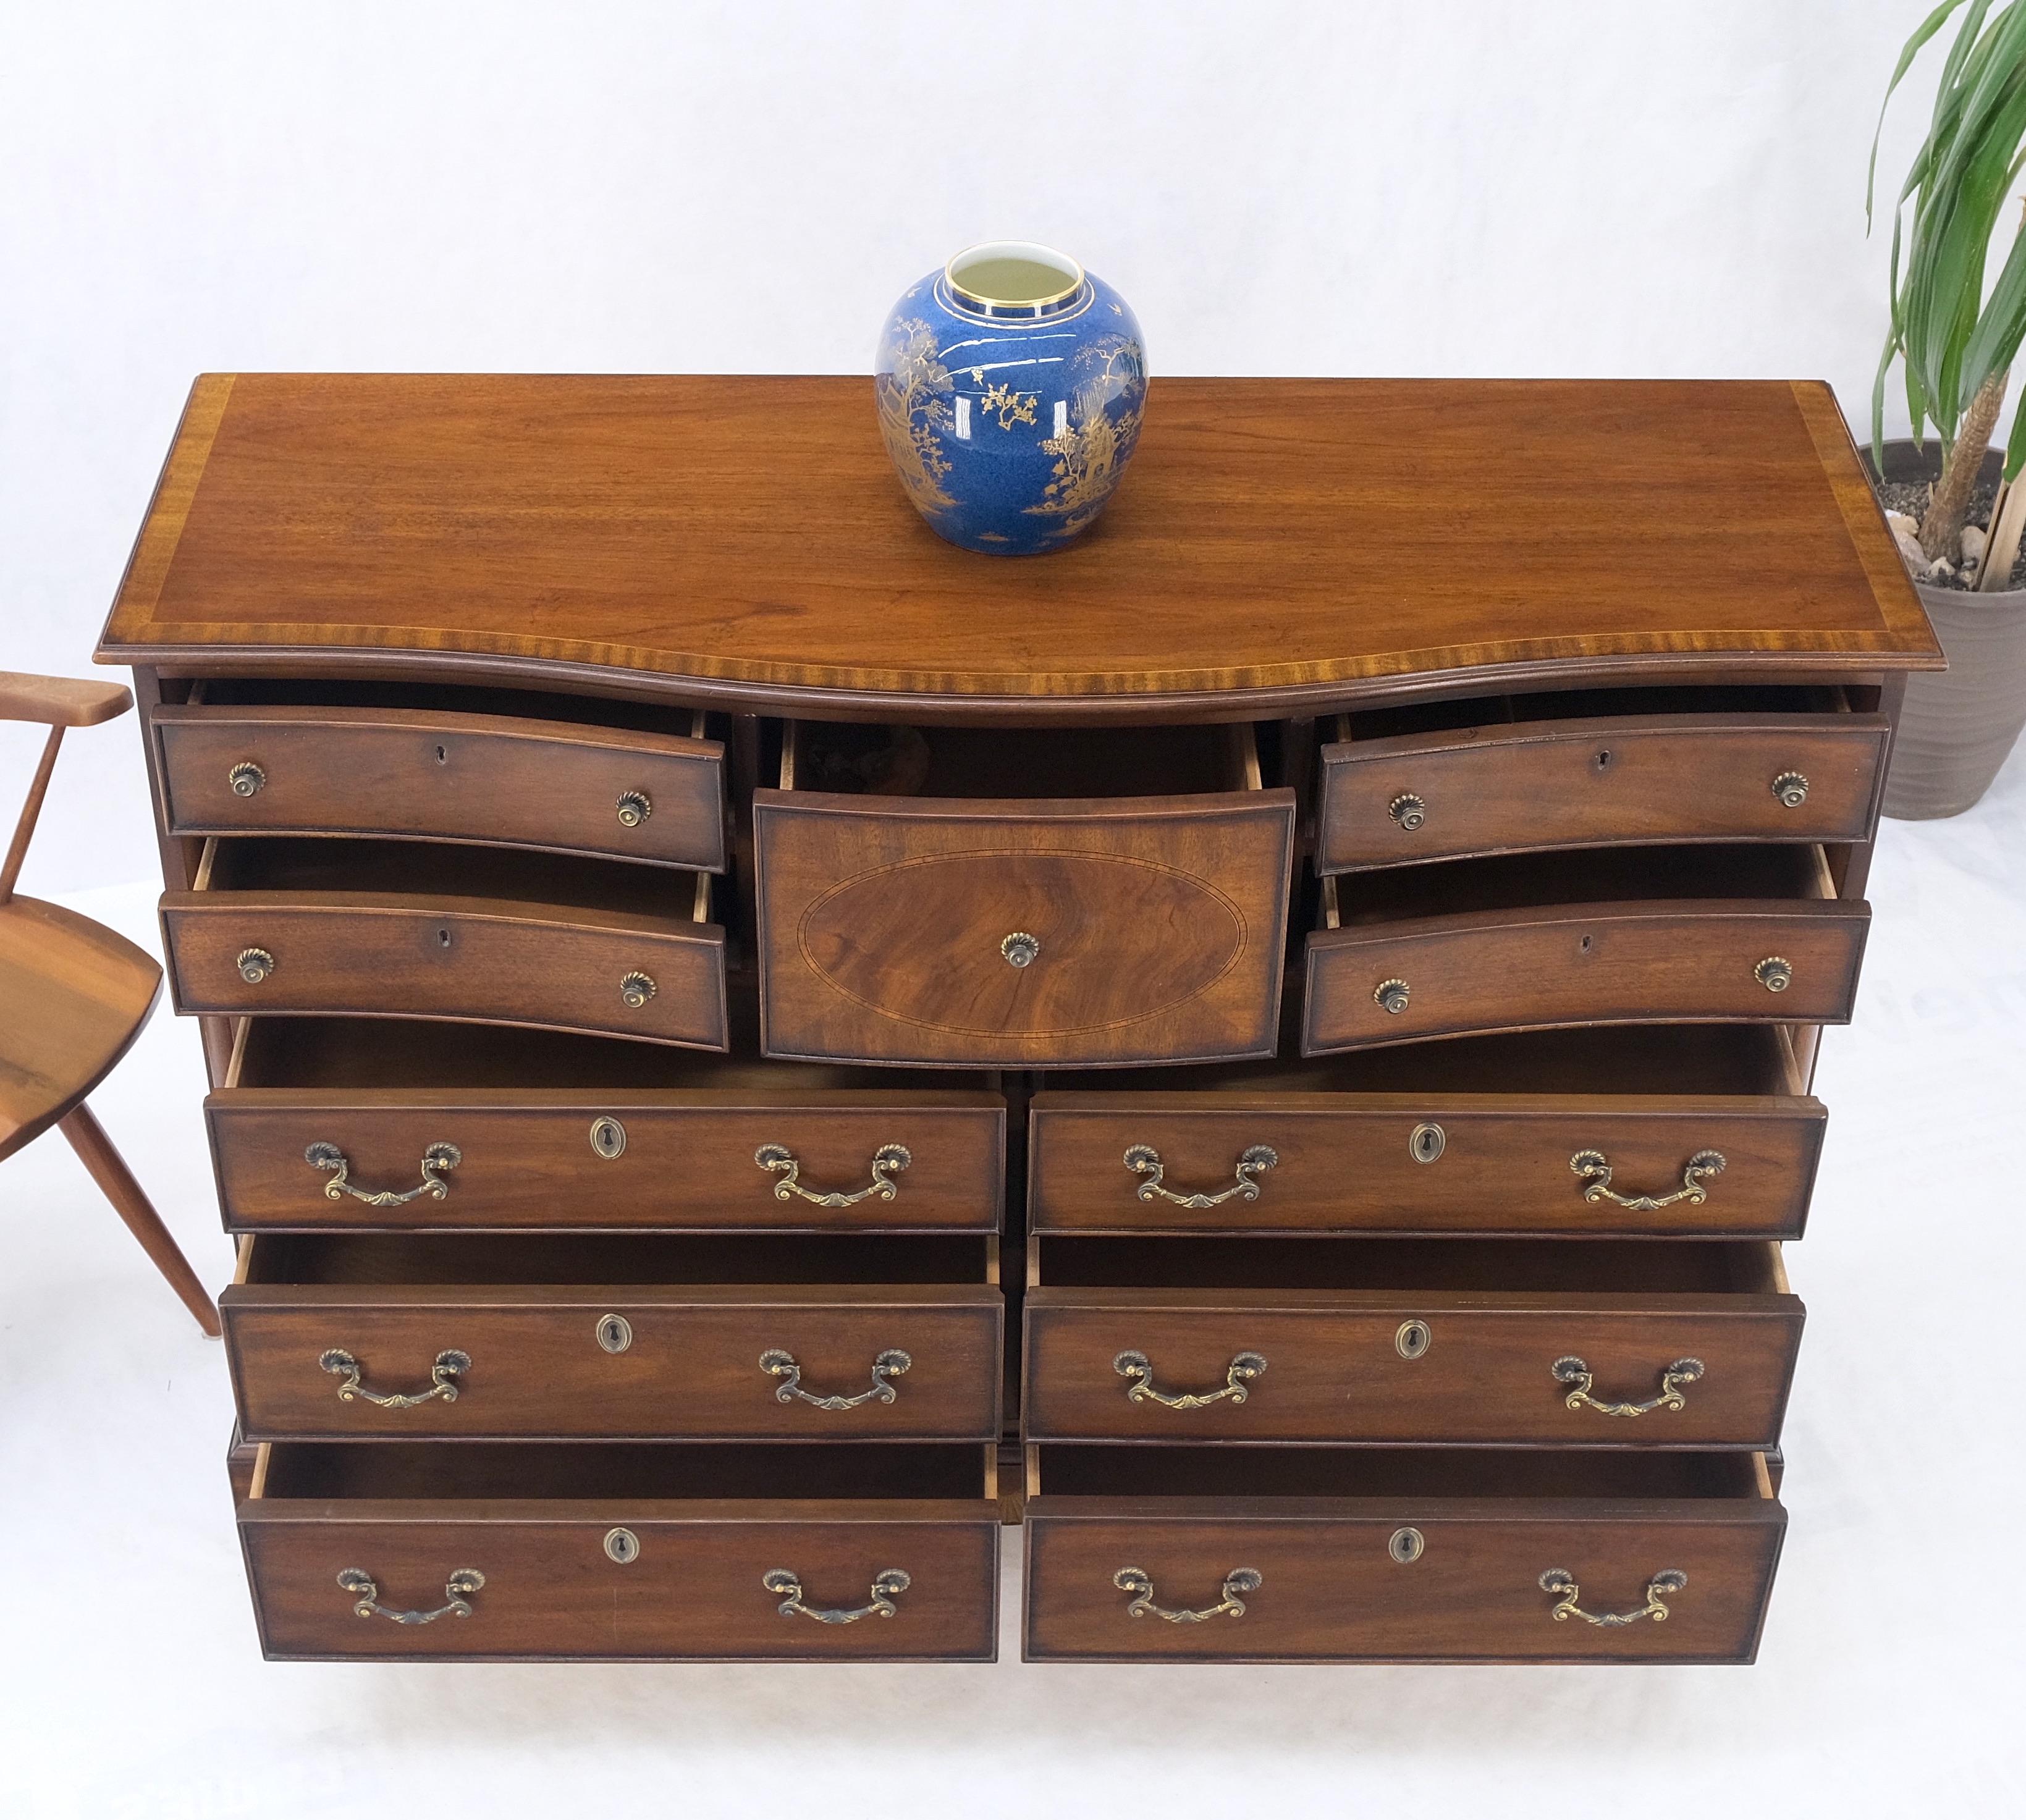 Banded Top Mahogany Inlayed Bracket Feet 11 Drawers Dresser Credenza MINT! For Sale 12